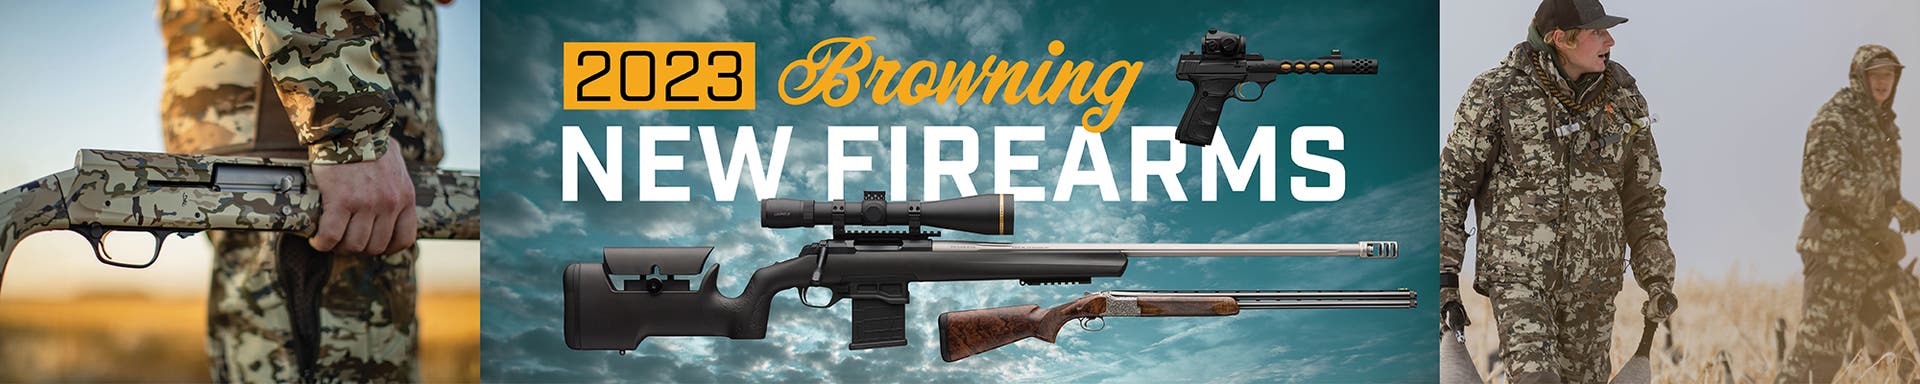 2023 Browning New Firearms